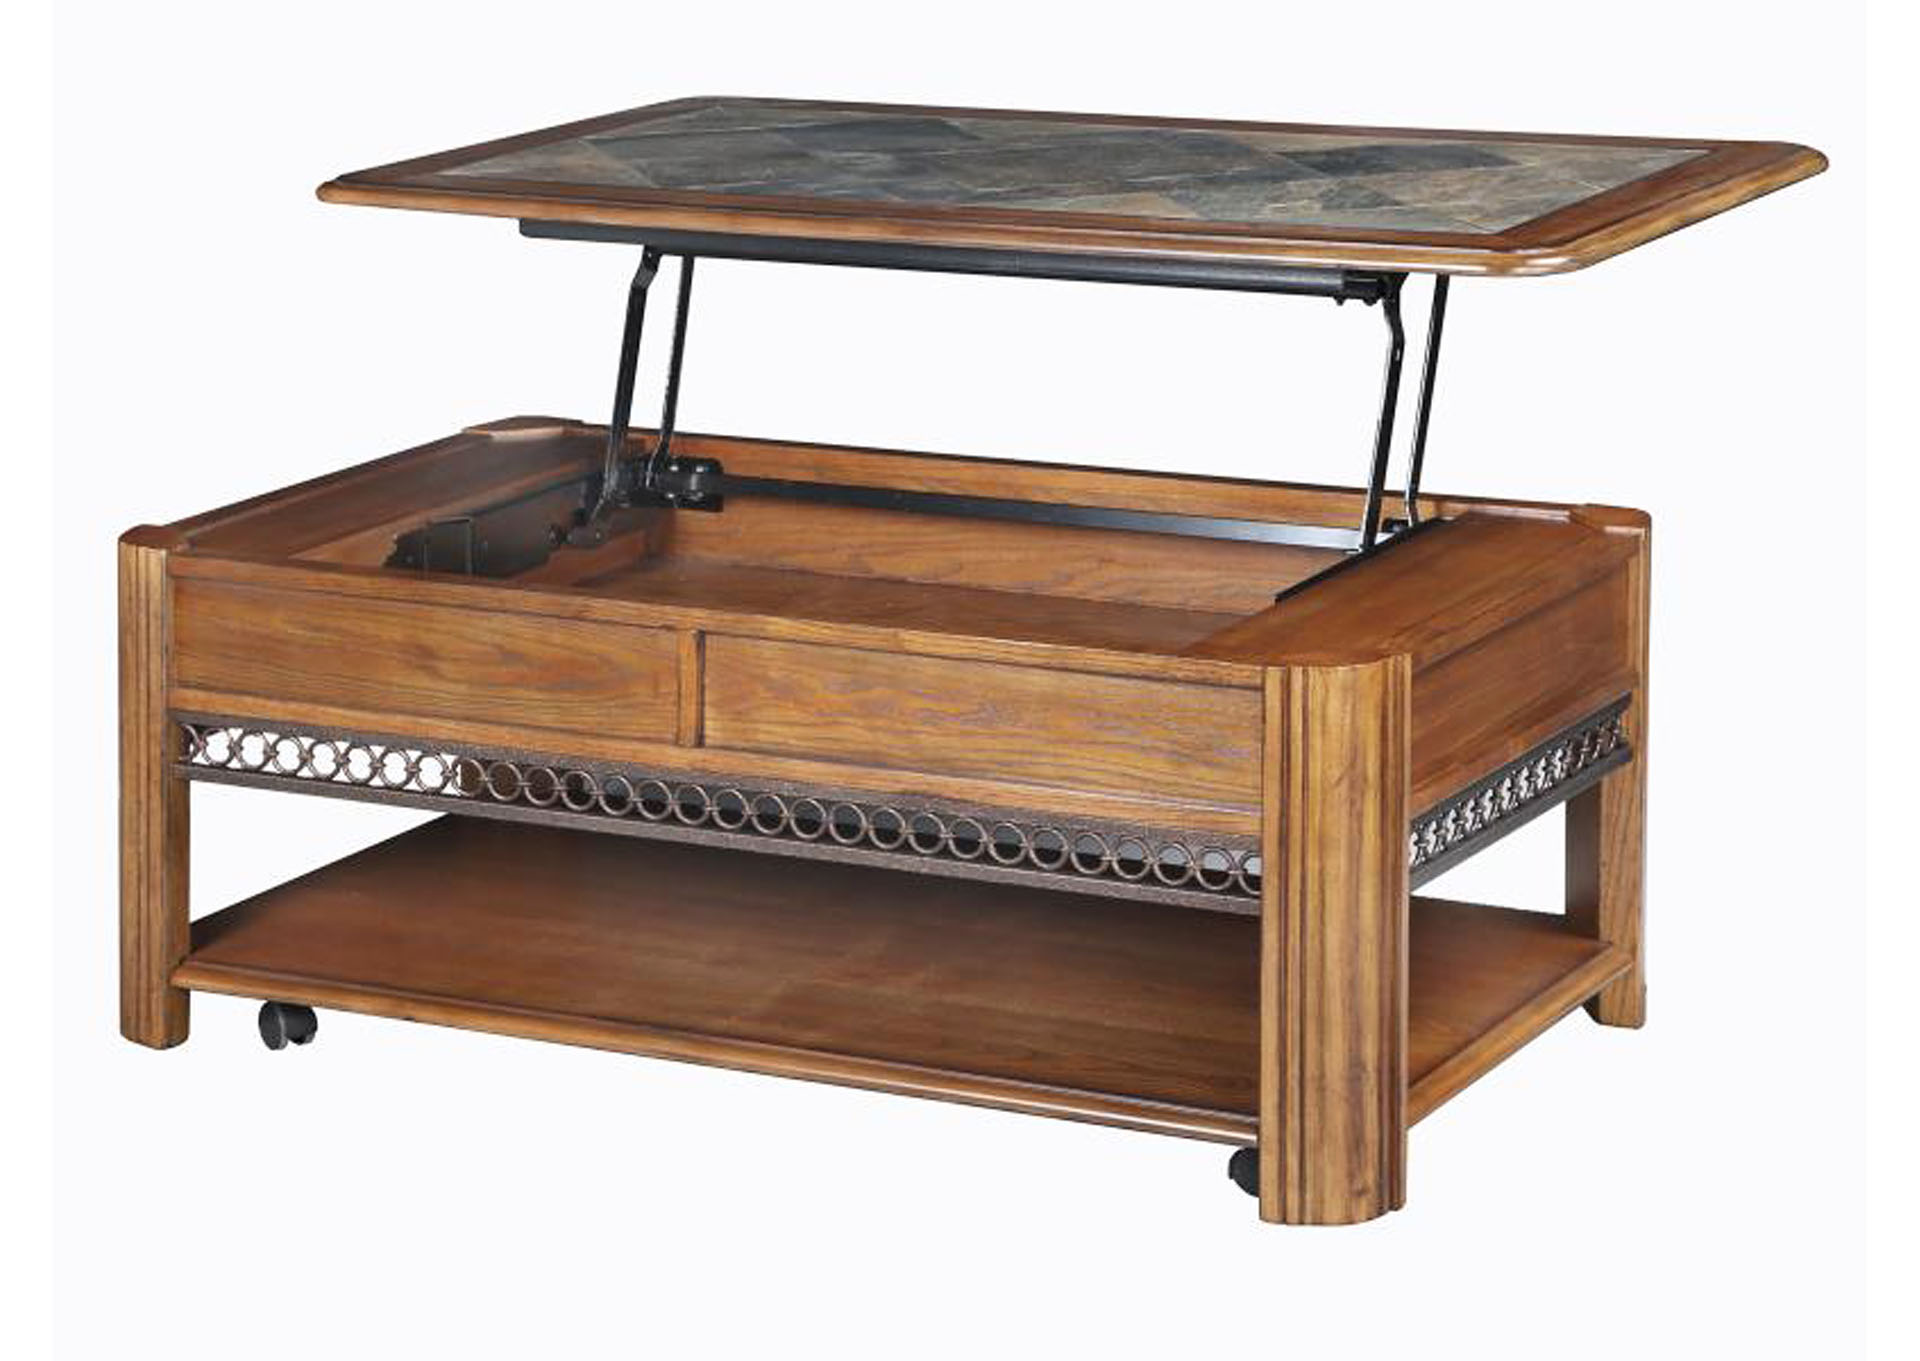 Madison Warm Nutmeg Rectangular Lift Top Cocktail Table w/Casters,Magnussen